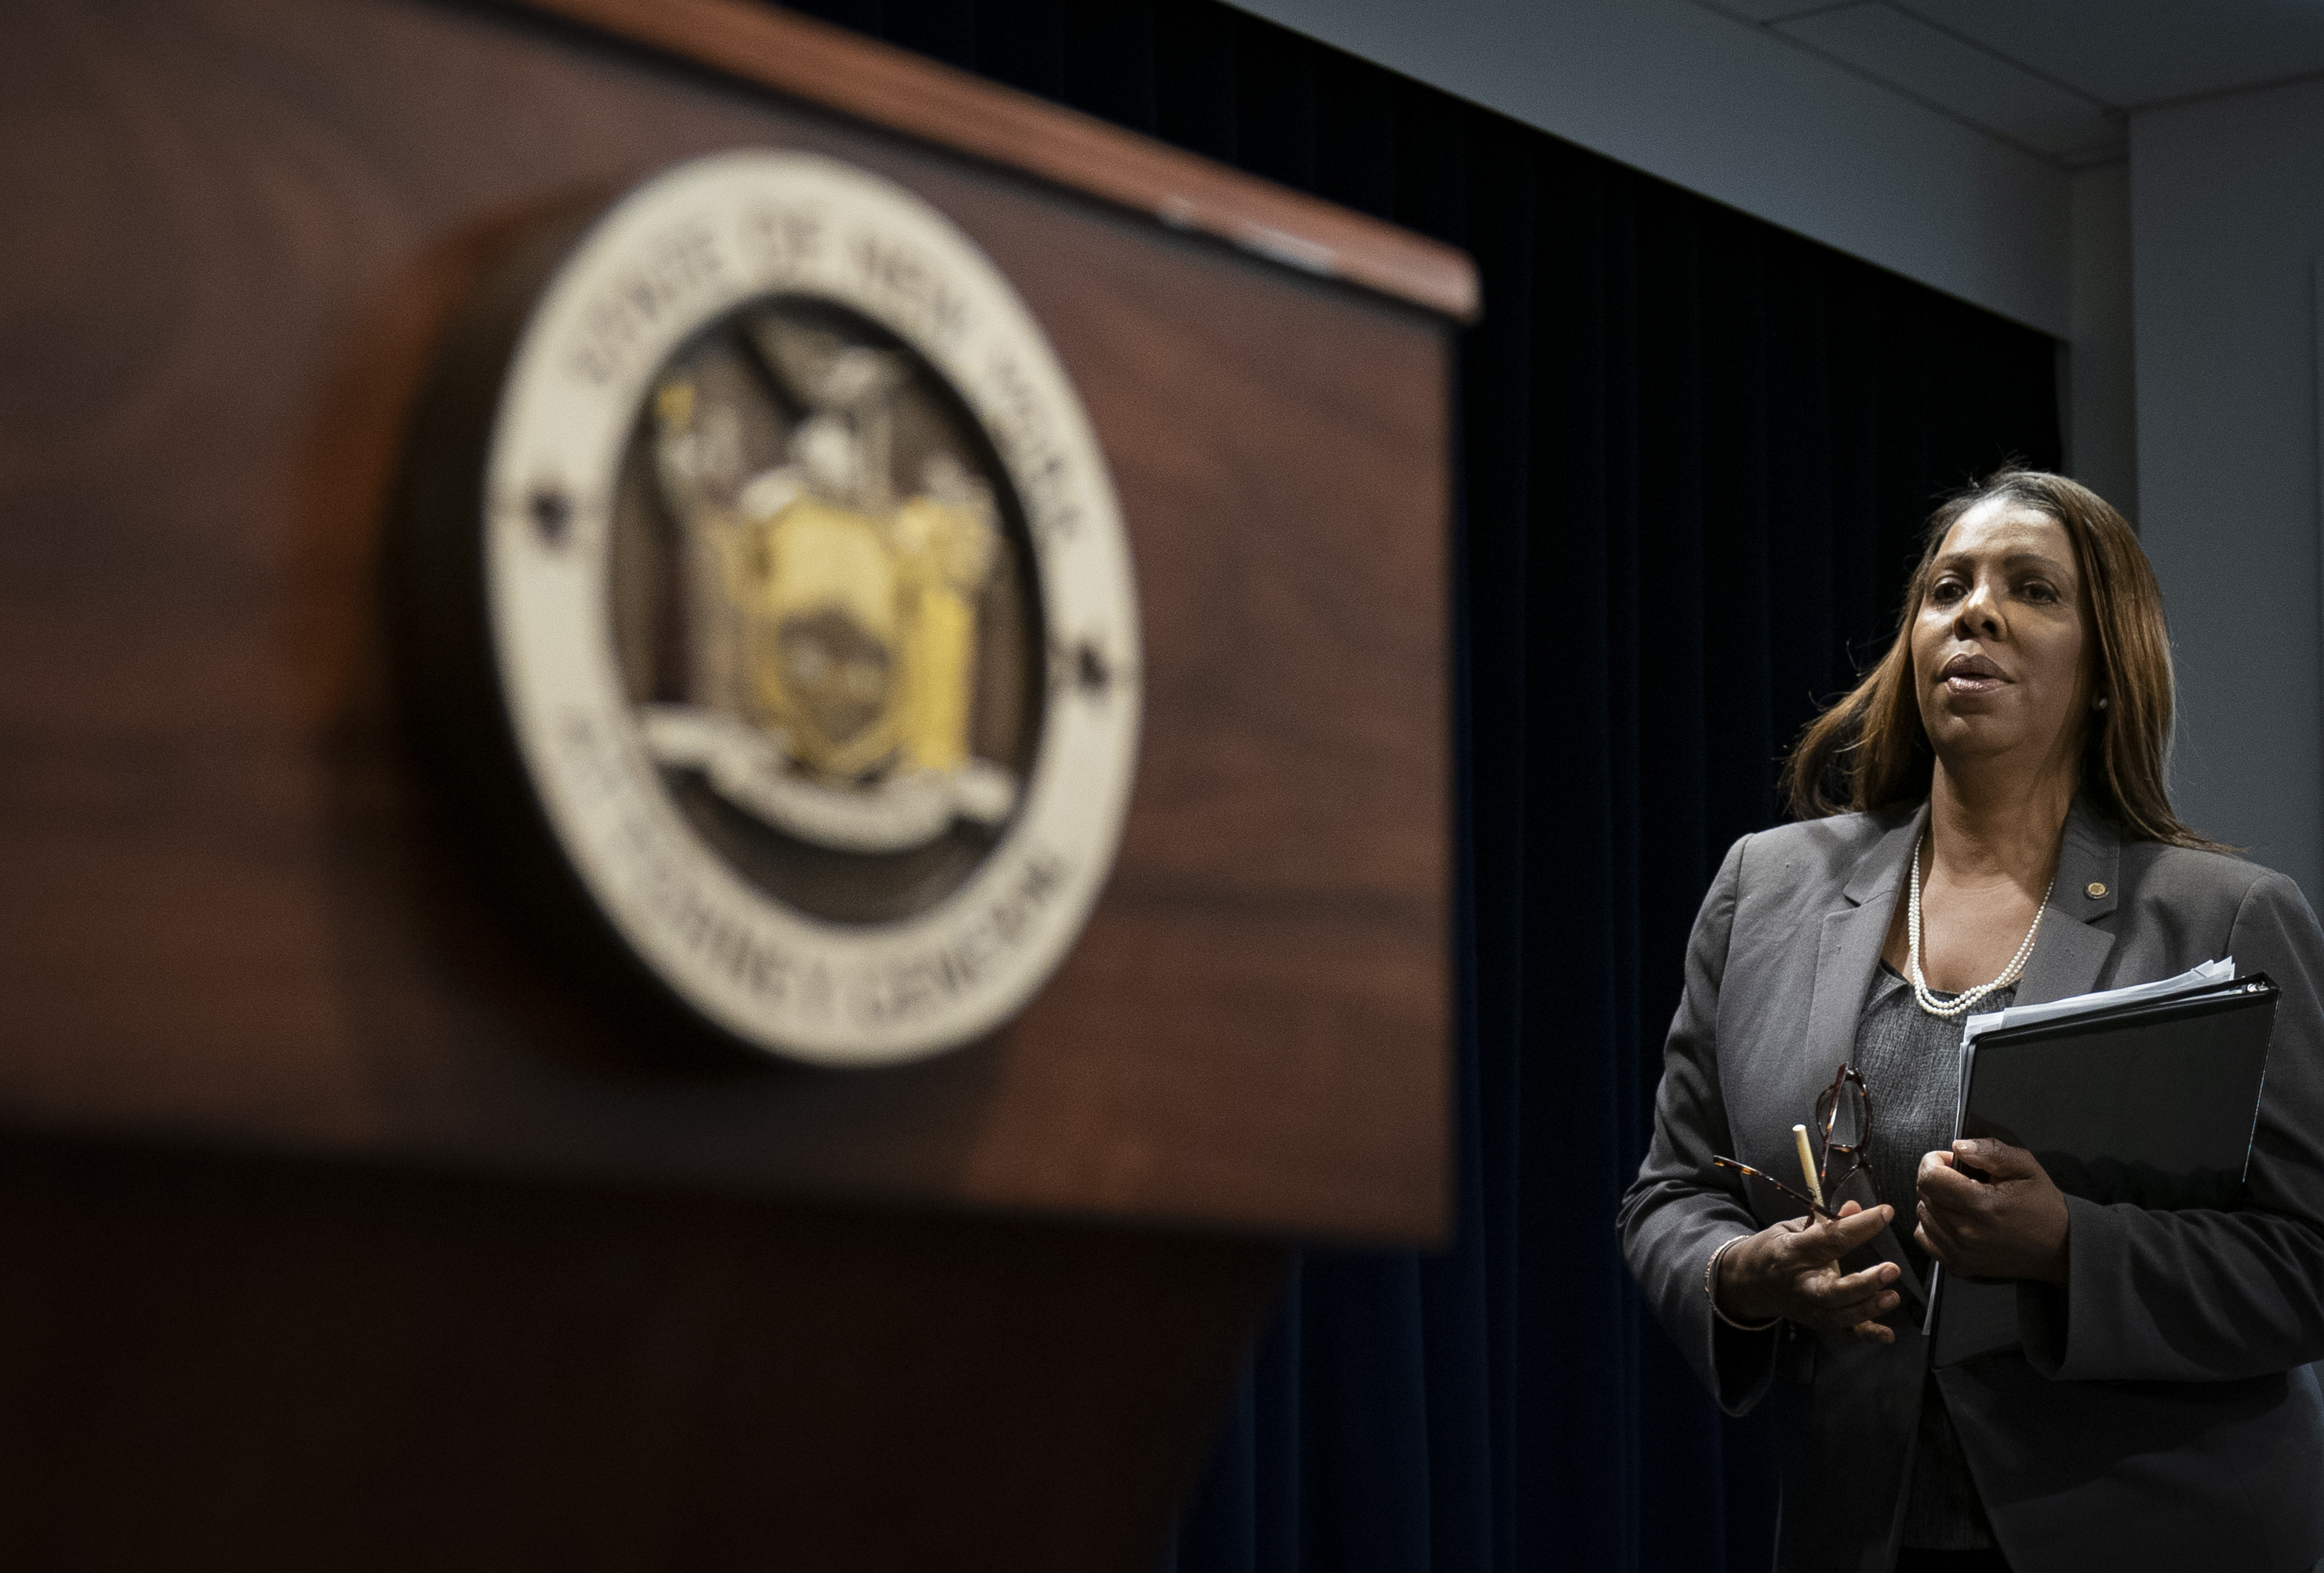 New York Attorney General Letitia James stands next to the state seal while holding a binder.